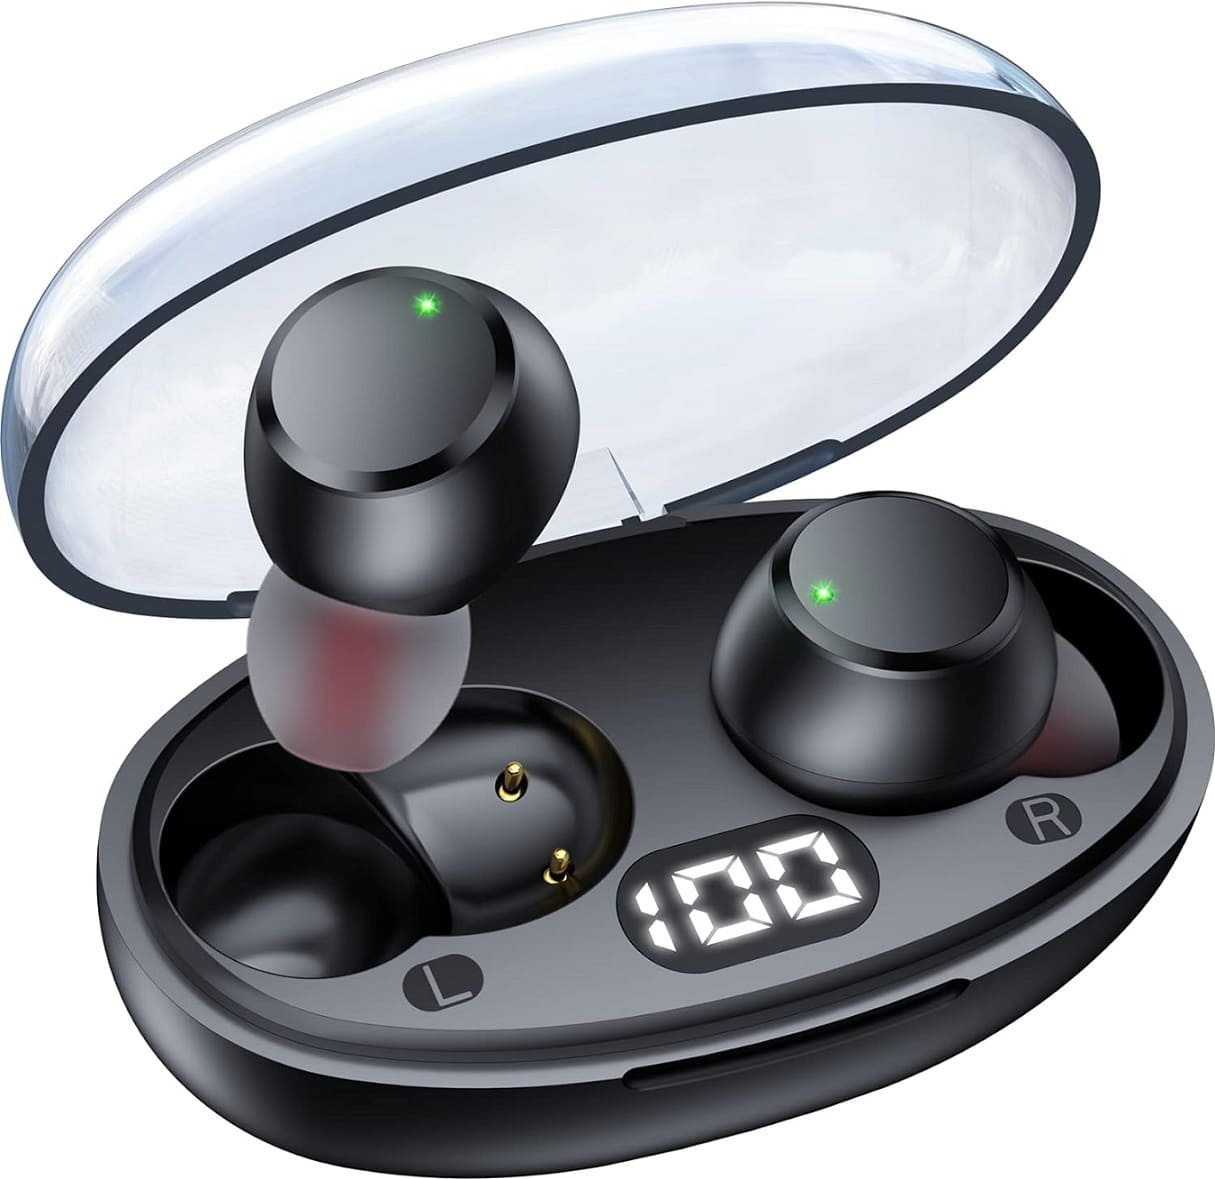 Zingbird T62 Earbuds Price in the US, Specs and Reviews